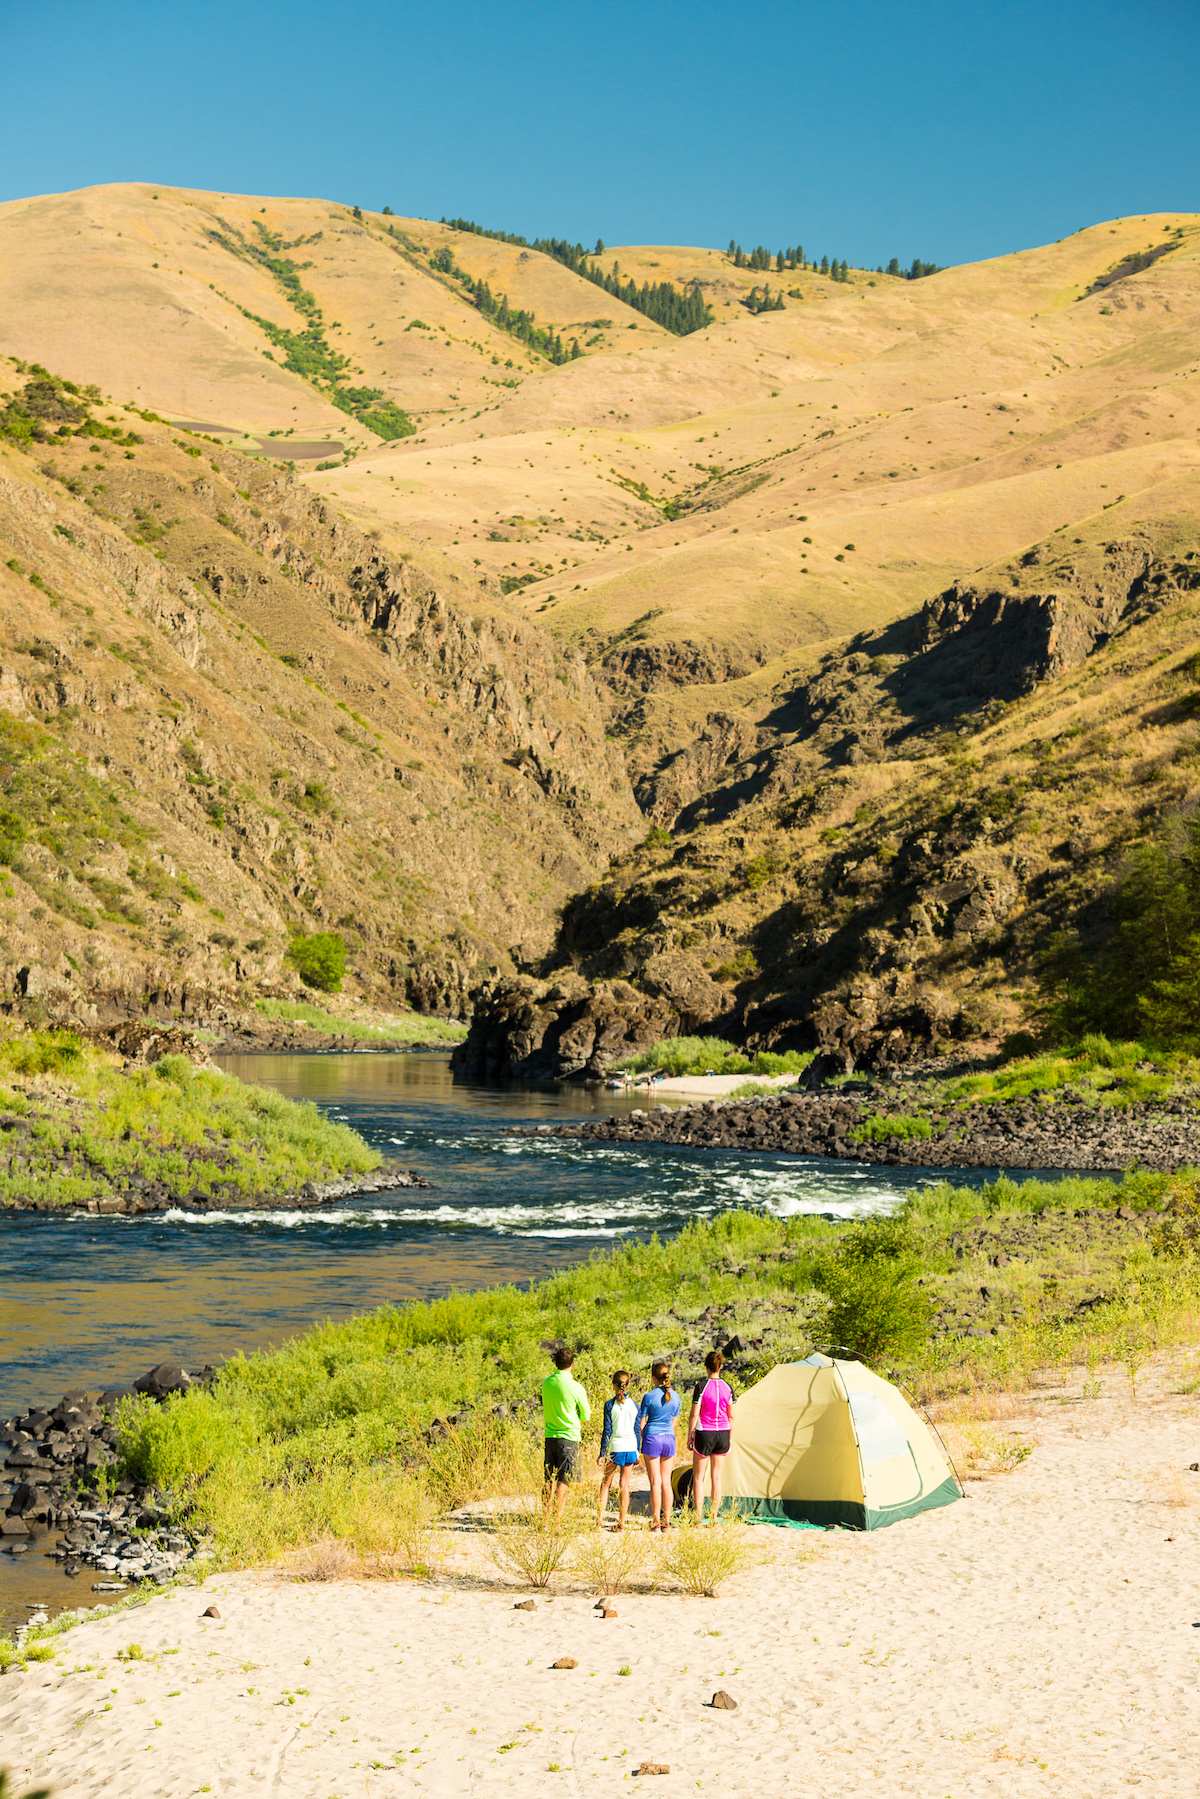 The Salmon River's sand banks provide beautiful camping spots. Photo c. ROW Adventures